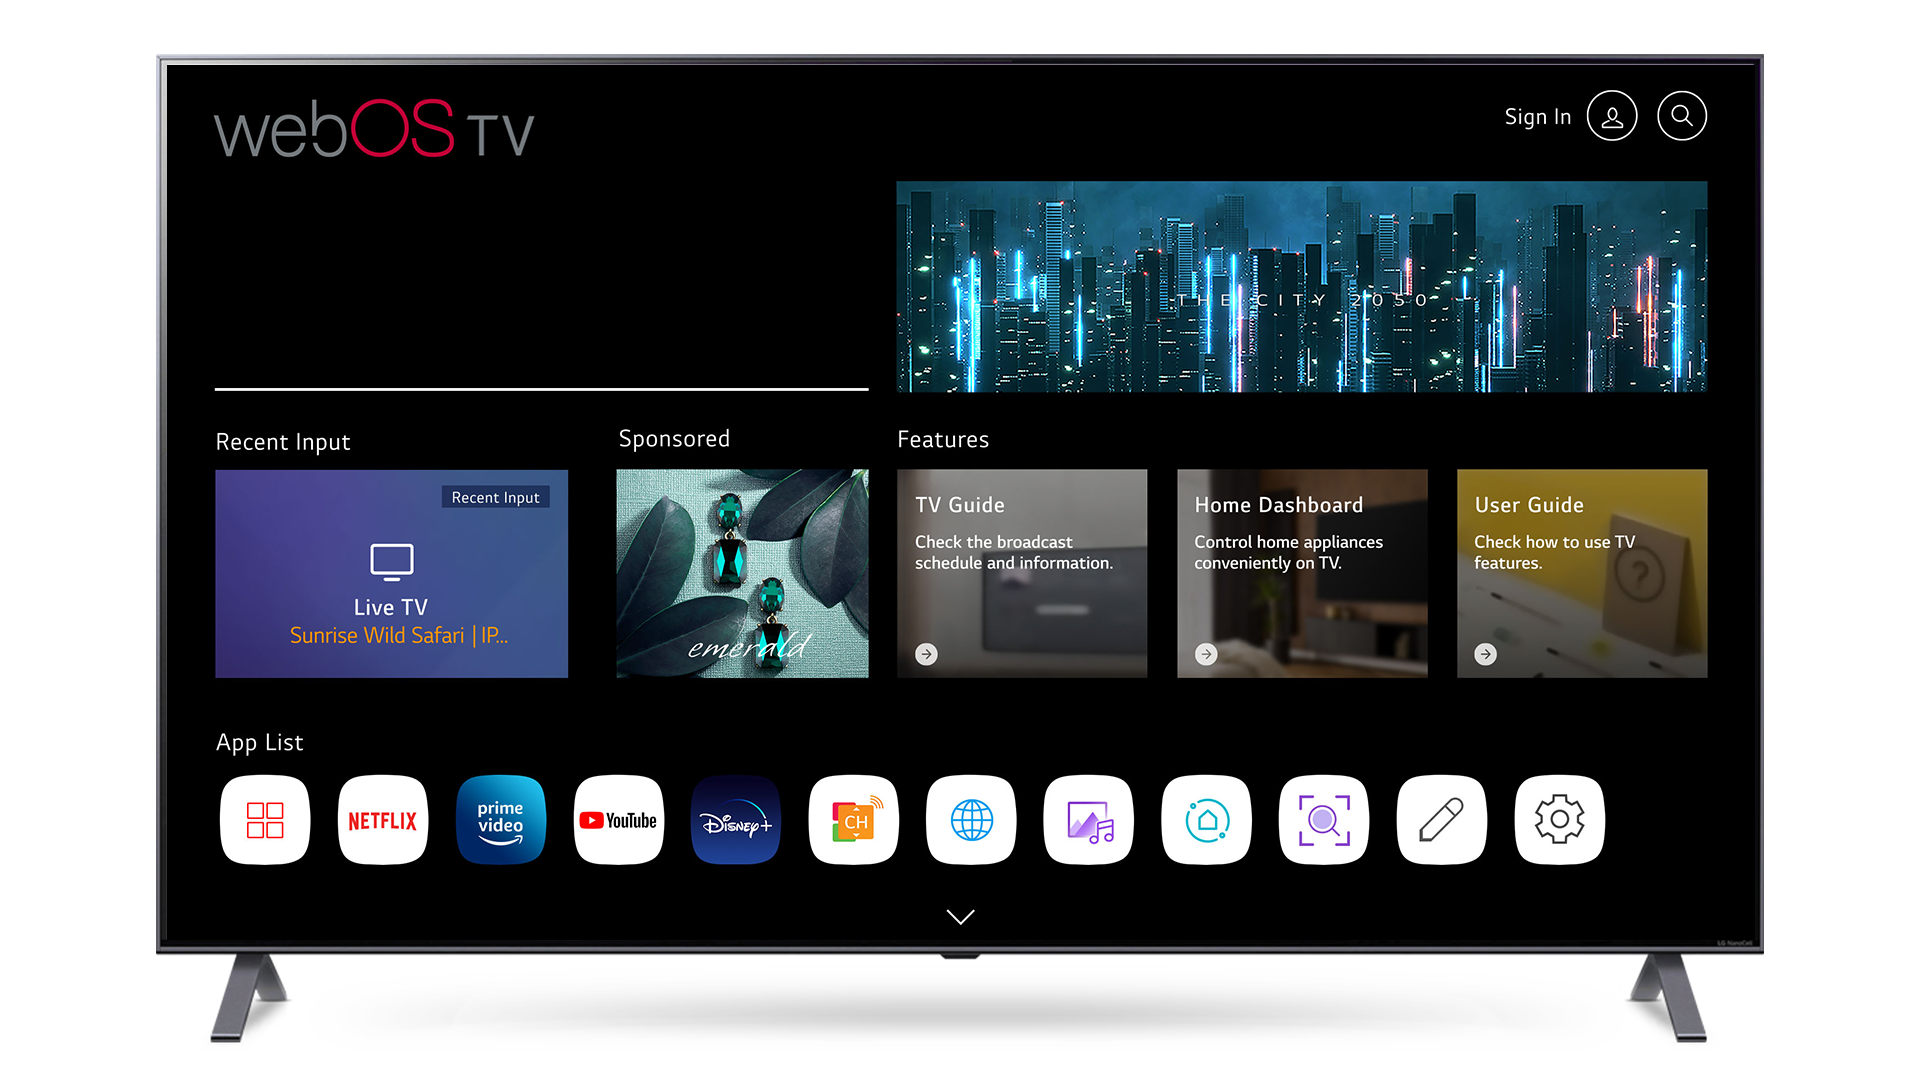 LG expands smart TV platform business with webOS Hub - an upgraded version of webOS